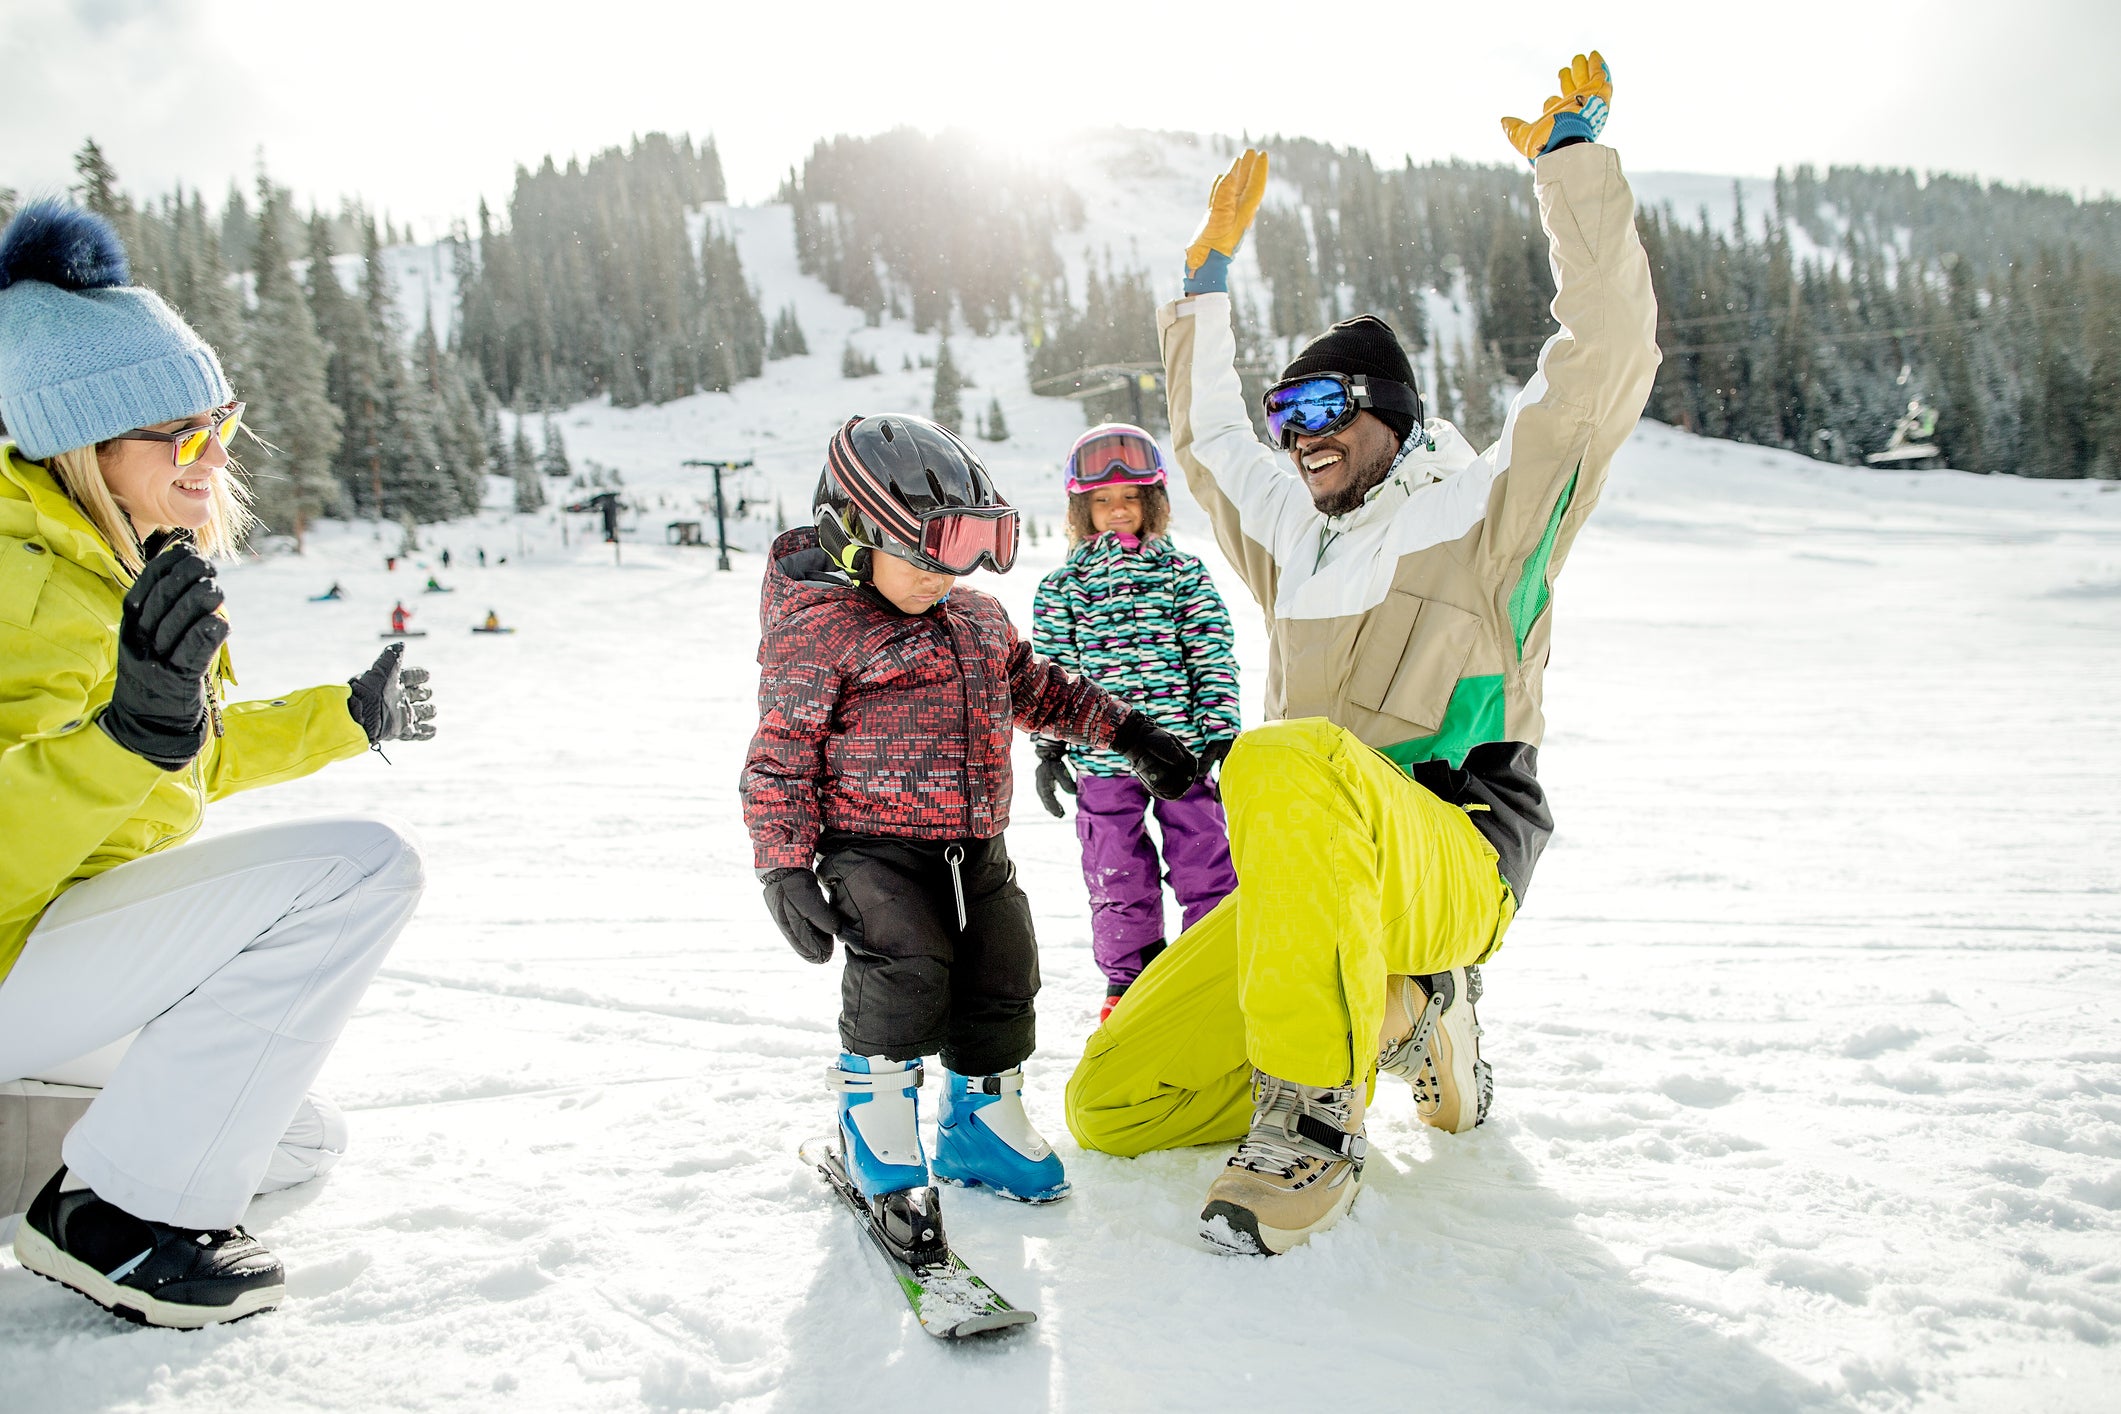 Best ski resorts in North America for families